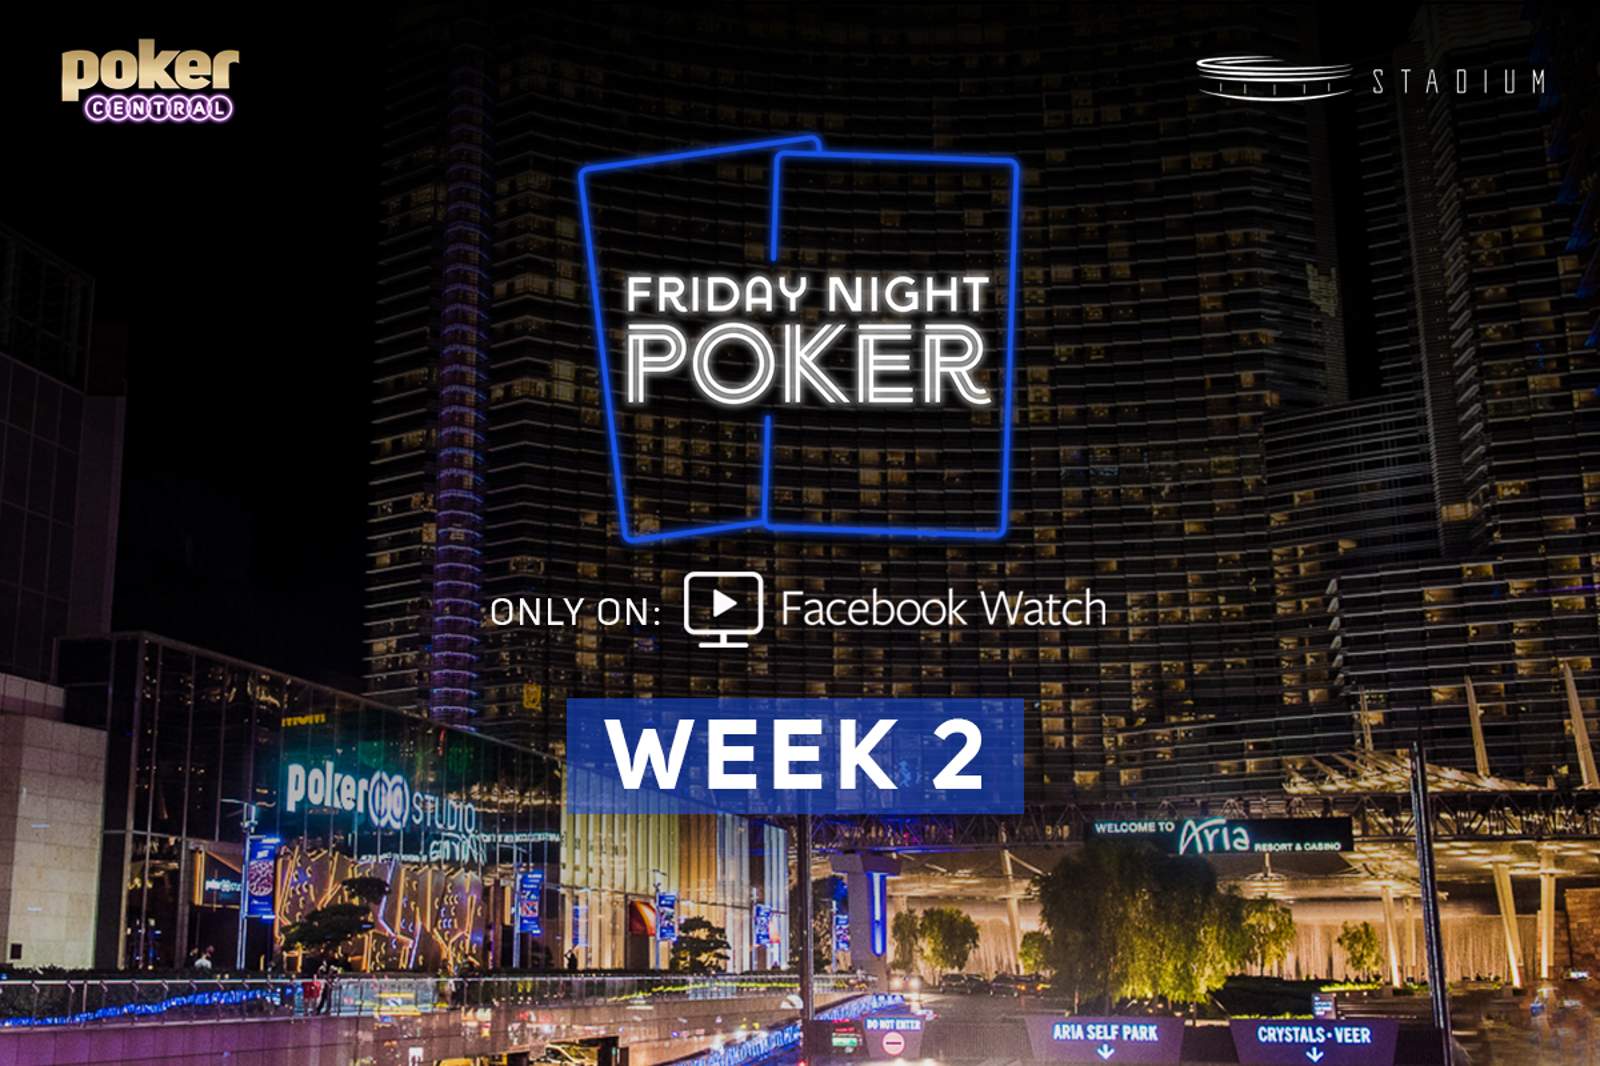 Friday Night Poker: Get Ready for Week 2 Action with Bryn Kenney